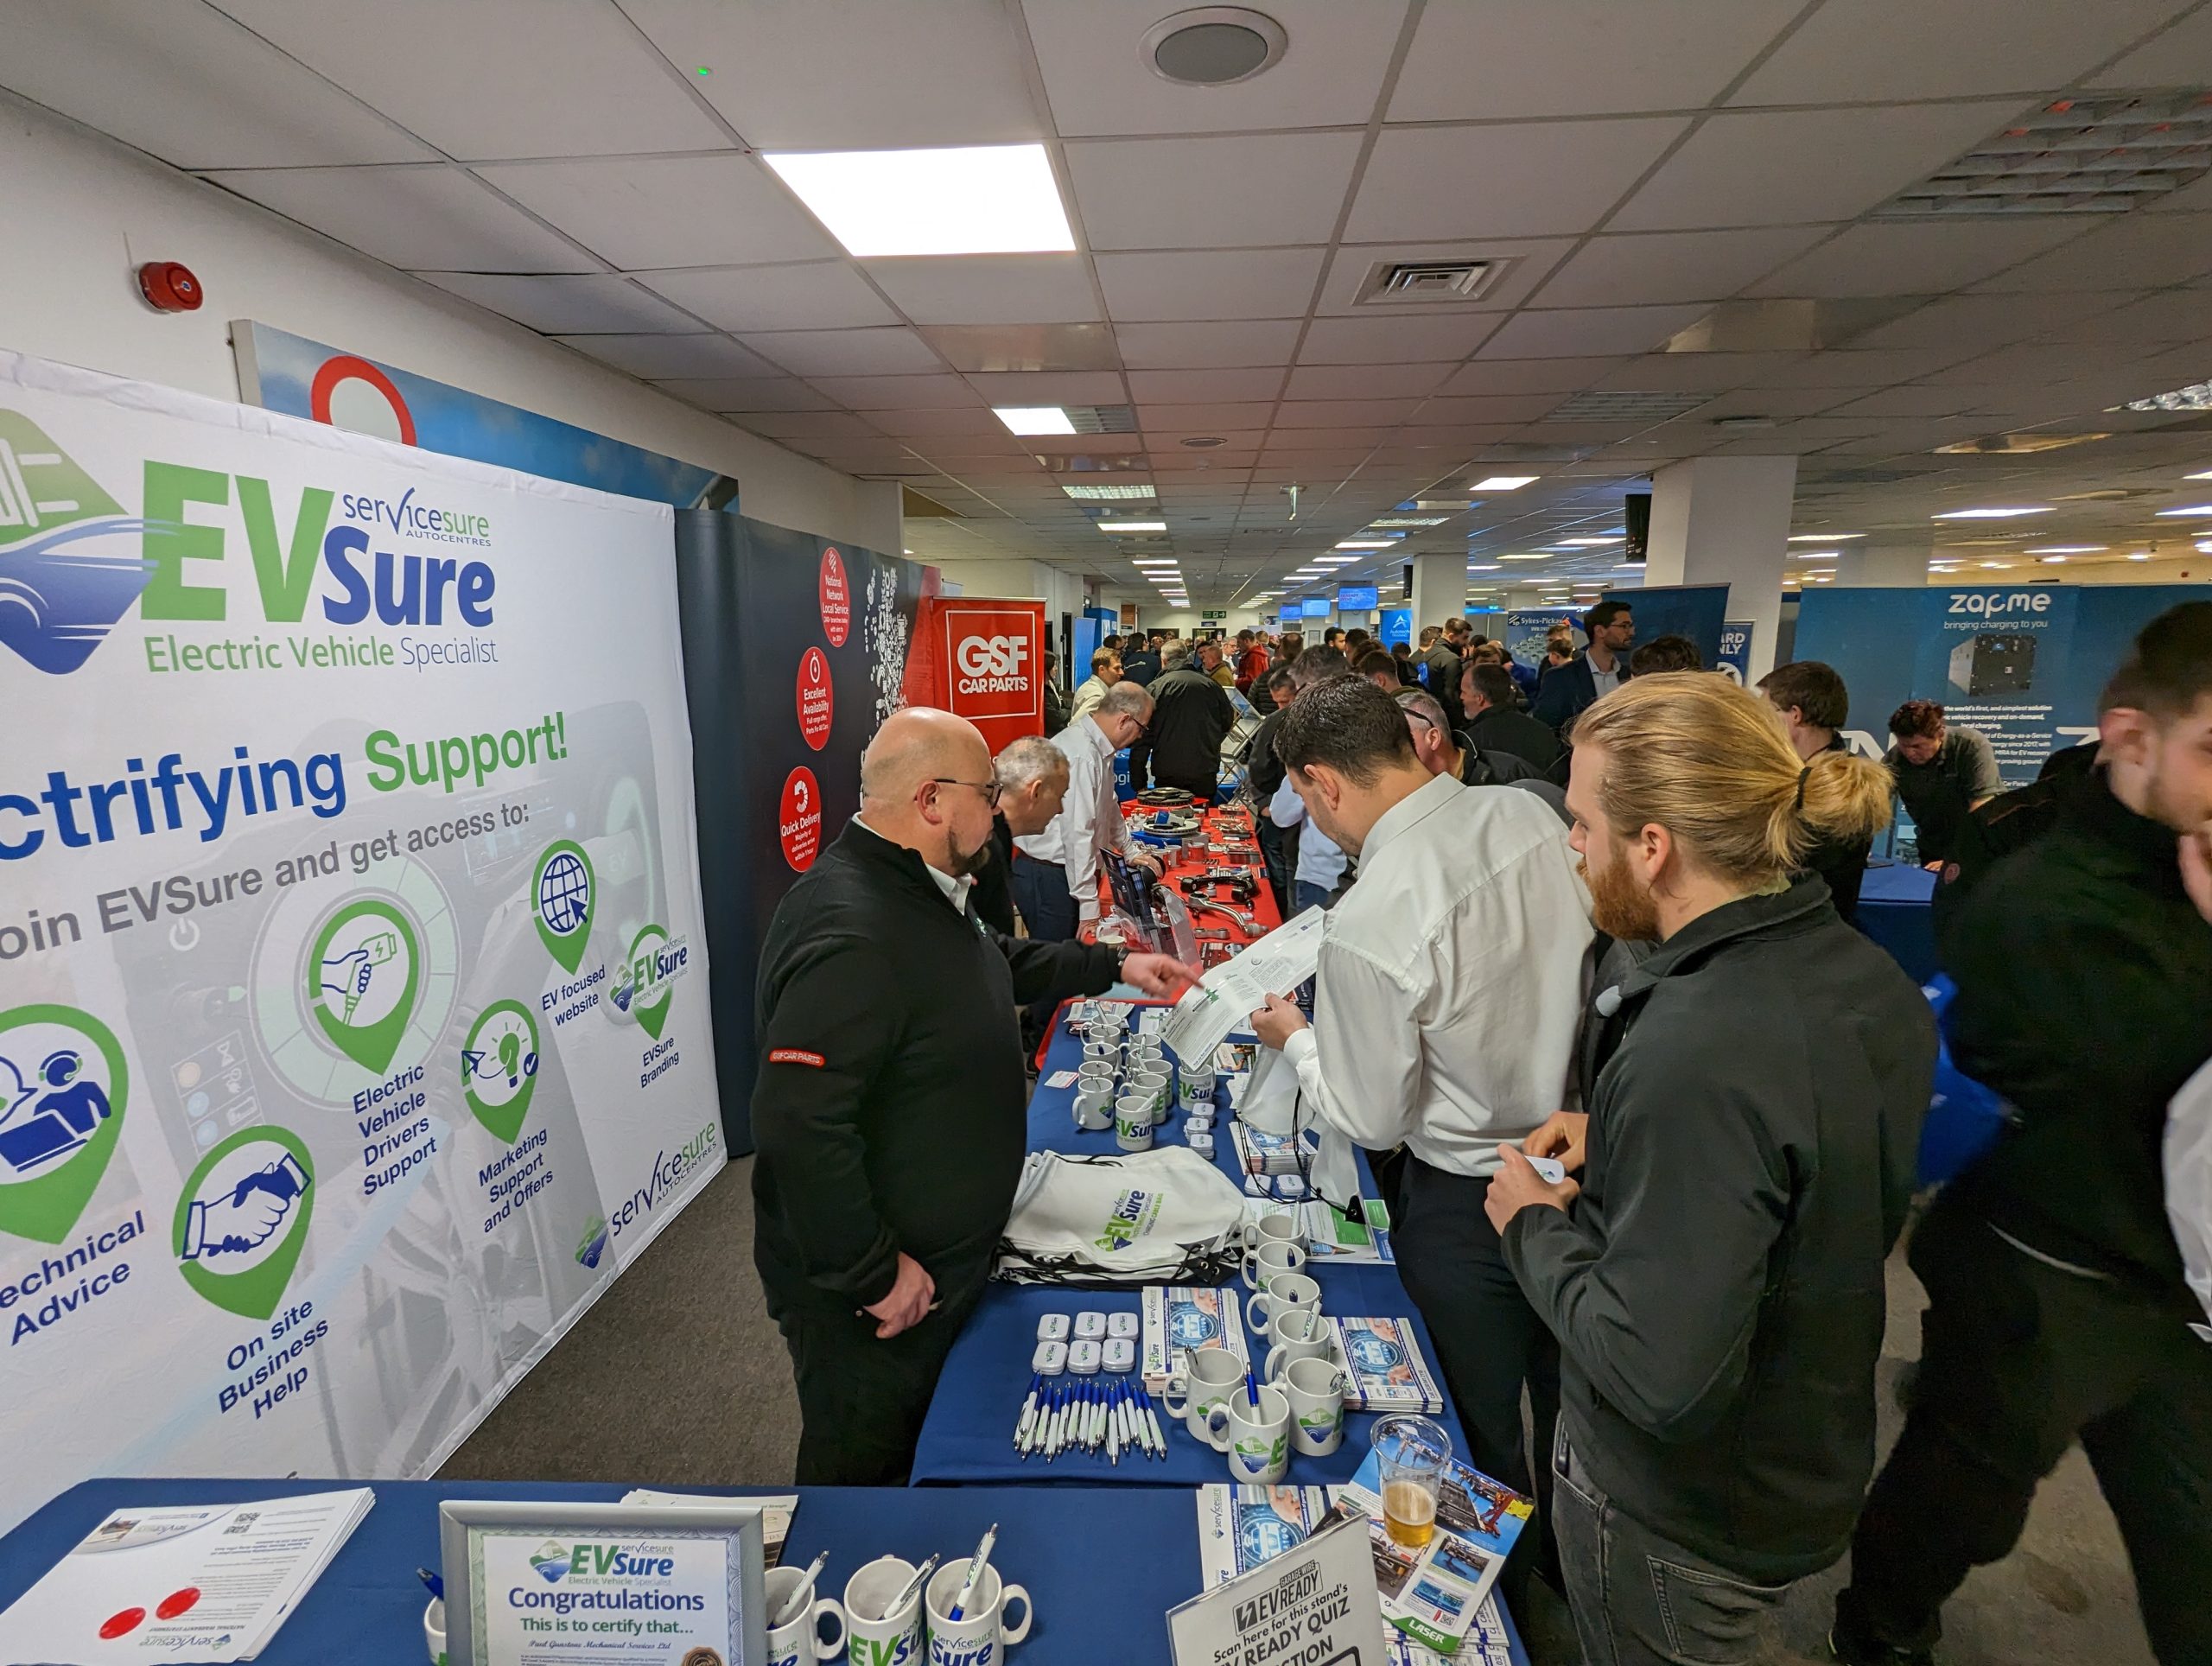 EV Ready attendees visit Servicesure’s EVsure stand and GSF Car Parts’ product exhibition stand